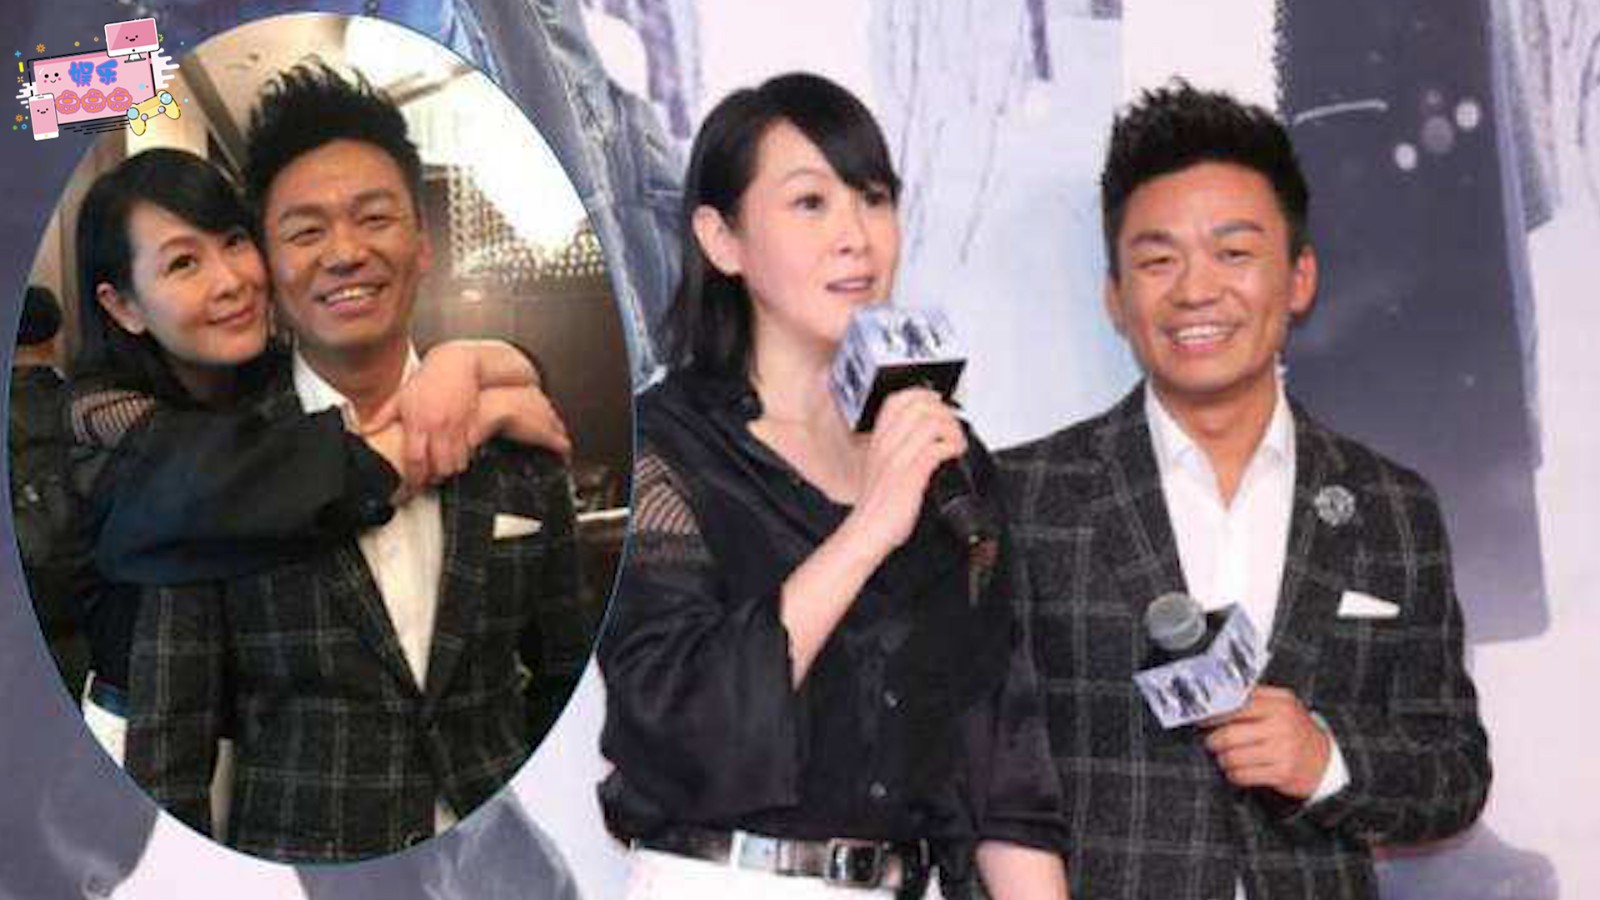 Wang Baoqiang's relationship with Liu Ruoying has been exposed. Netizens: After hiding for so long, they can't hide it at last.